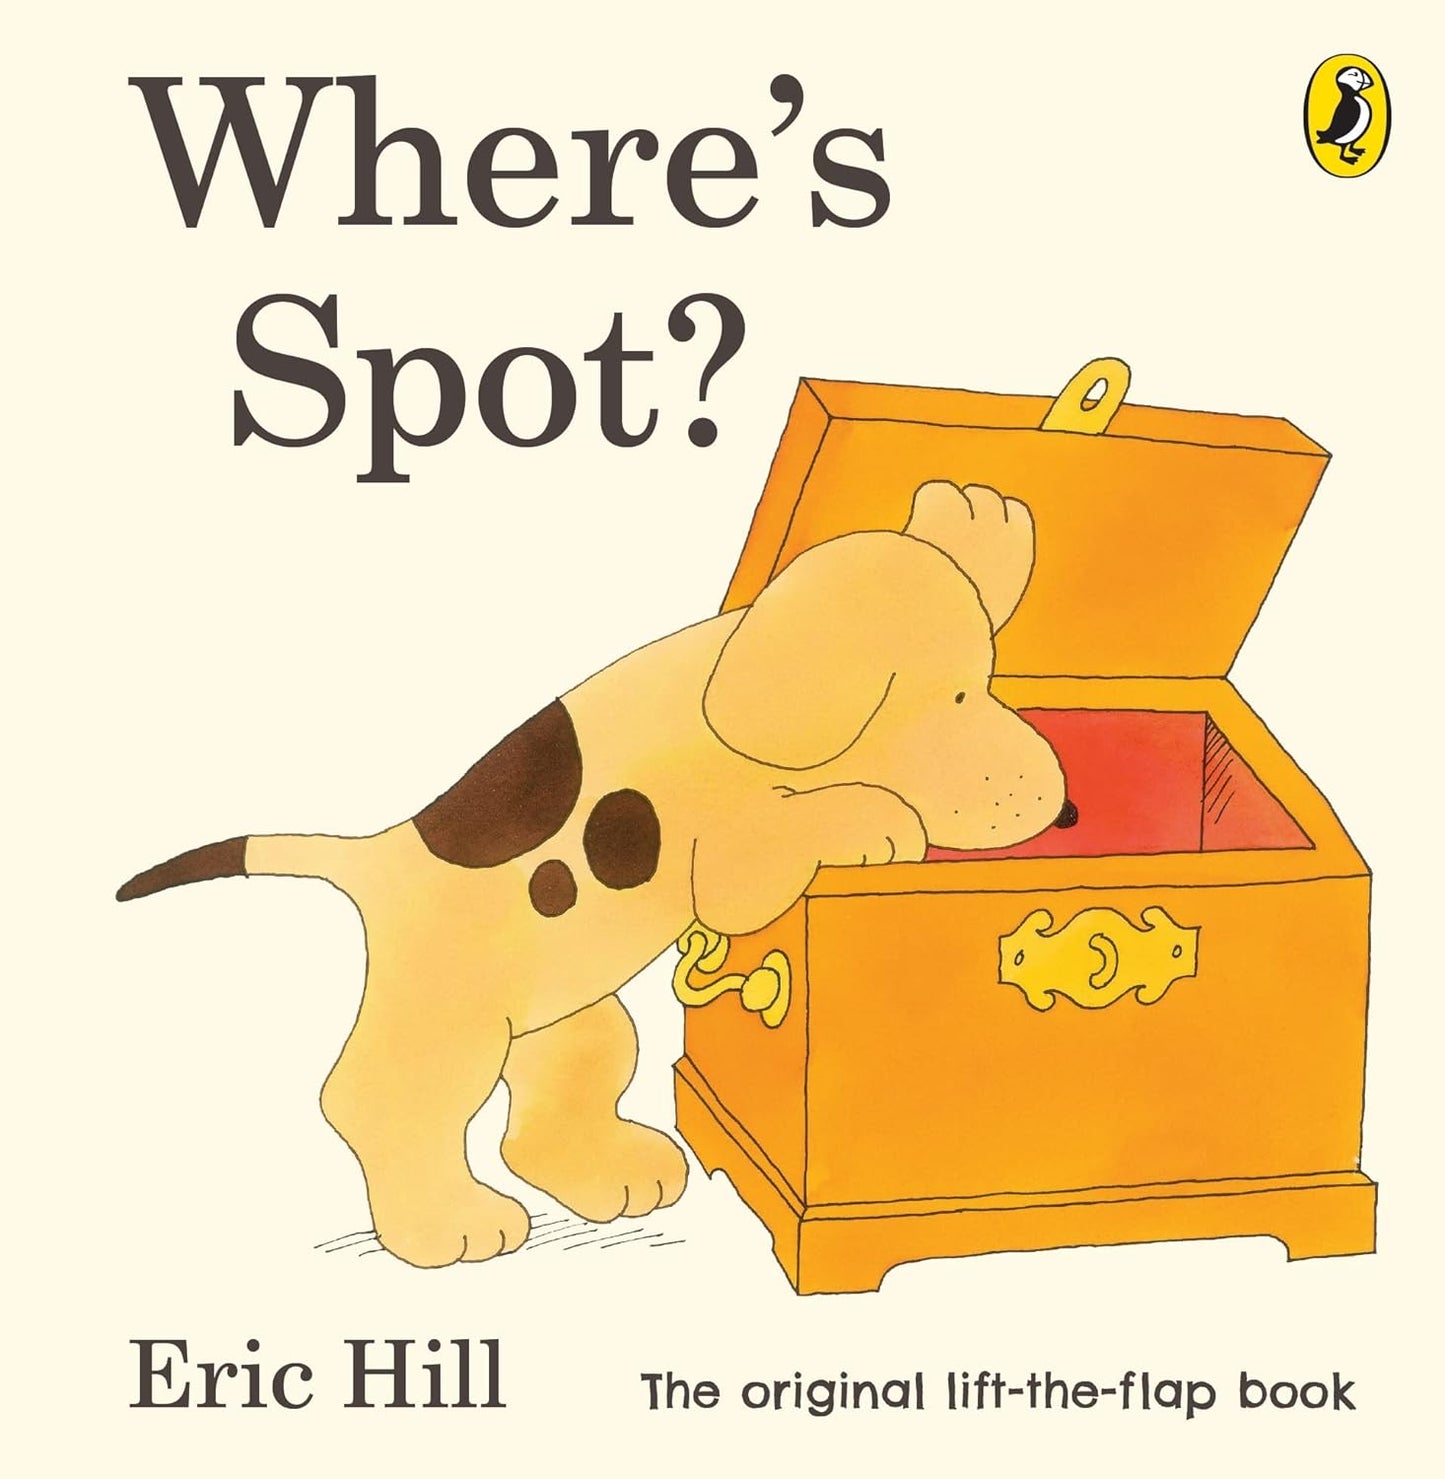 Where's Spot by Eric Hill